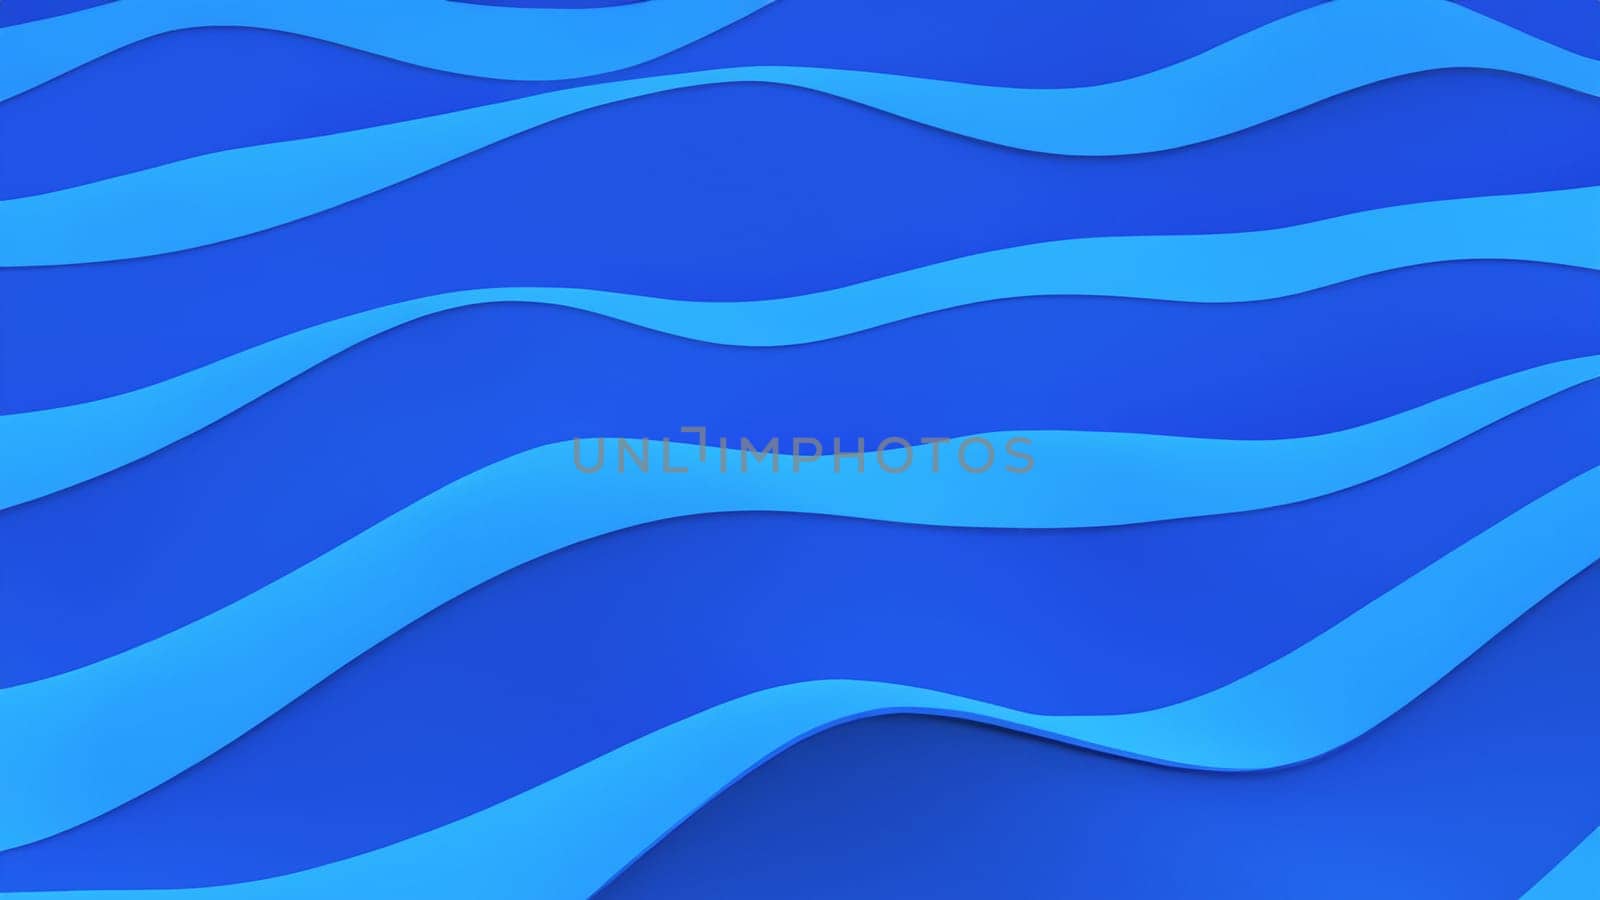 Abstract 3D rendering of blue wavy surface. Paper cut out style. Decorative background with turquoise waves. by DesignMarjolein